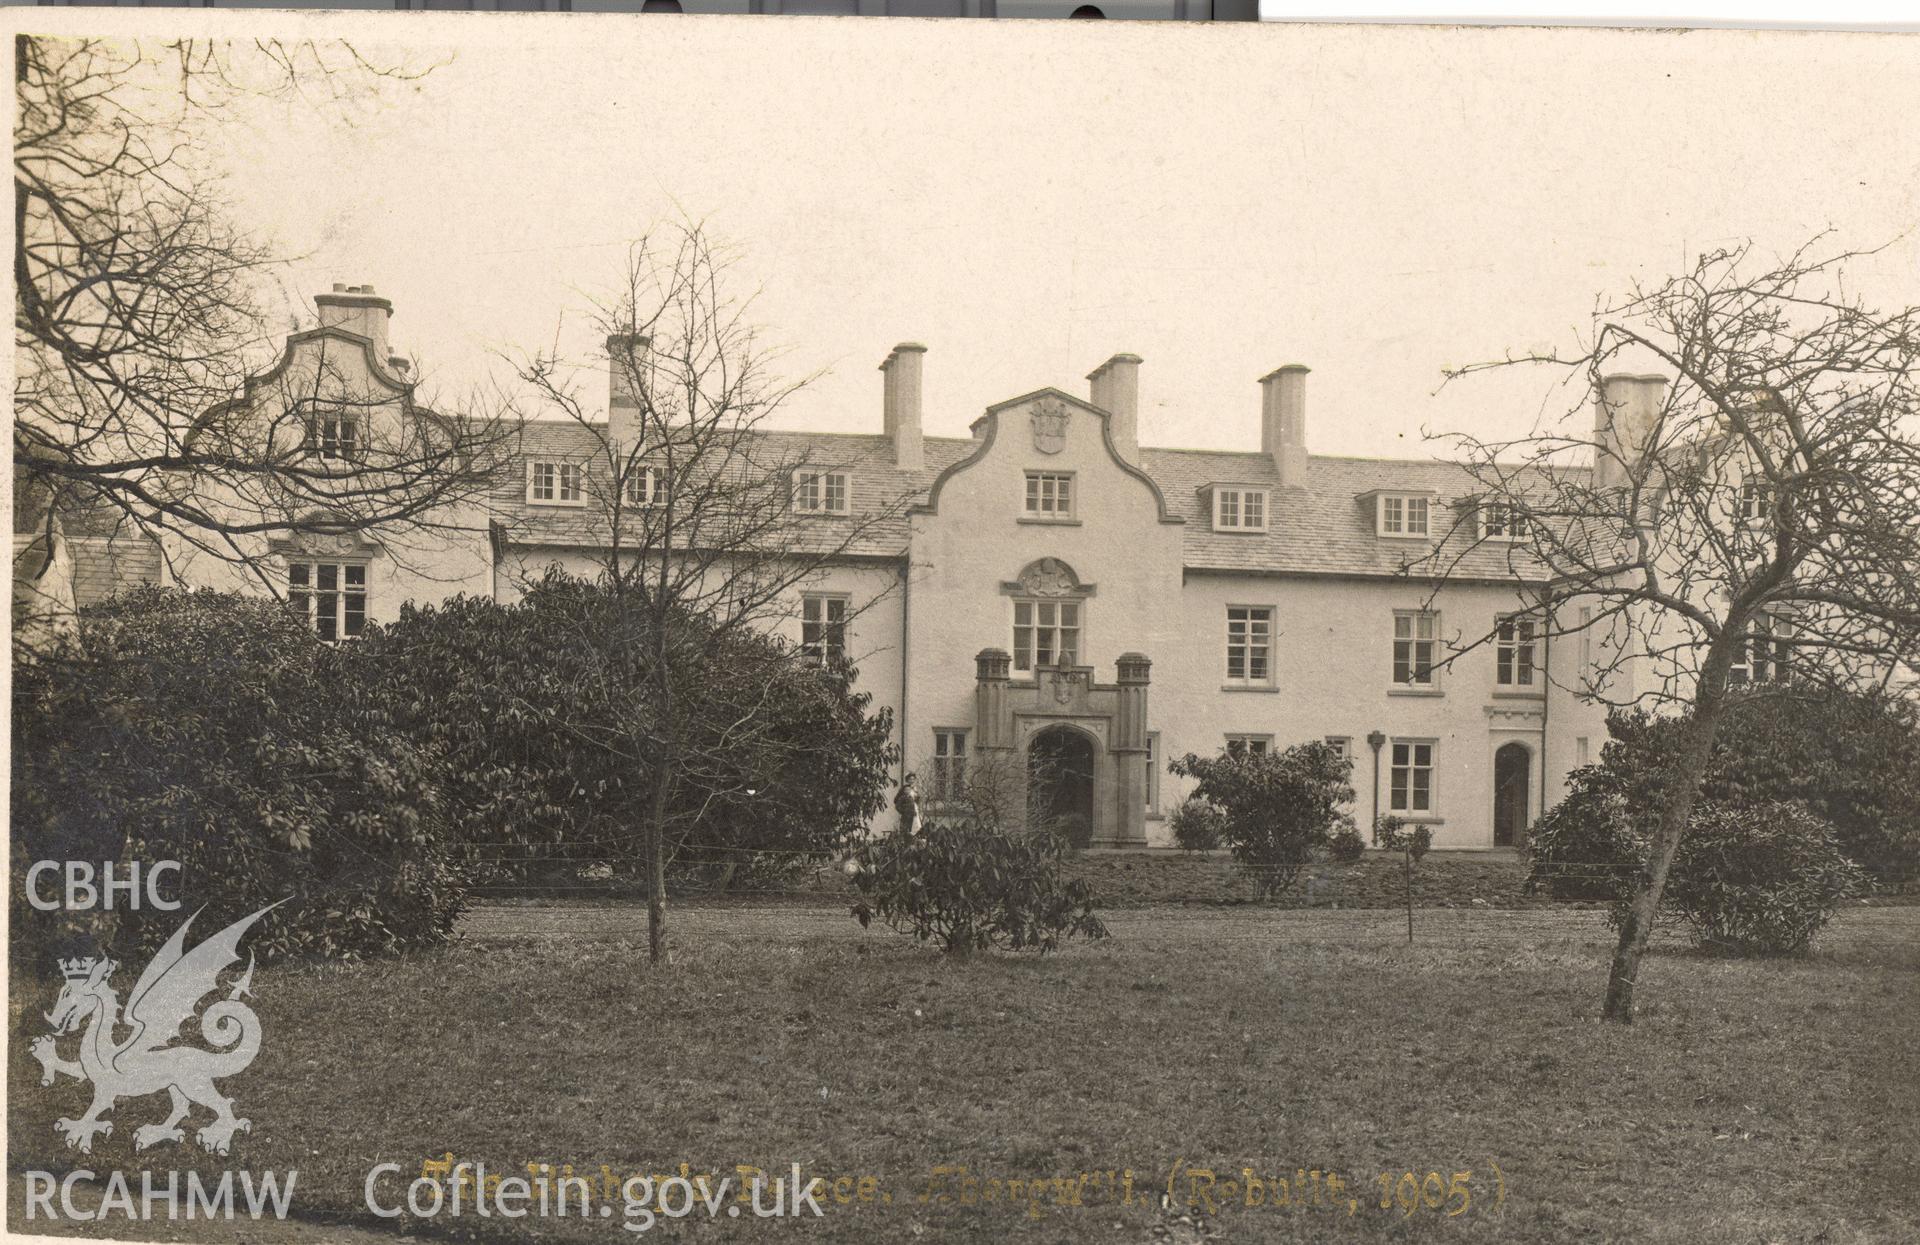 Digitised postcard image of the Bishop's Palace, Abergwili. Produced by Parks and Gardens Data Services, from an original item in the Peter Davis Collection at Parks and Gardens UK. We hold only web-resolution images of this collection, suitable for viewing on screen and for research purposes only. We do not hold the original images, or publication quality scans.